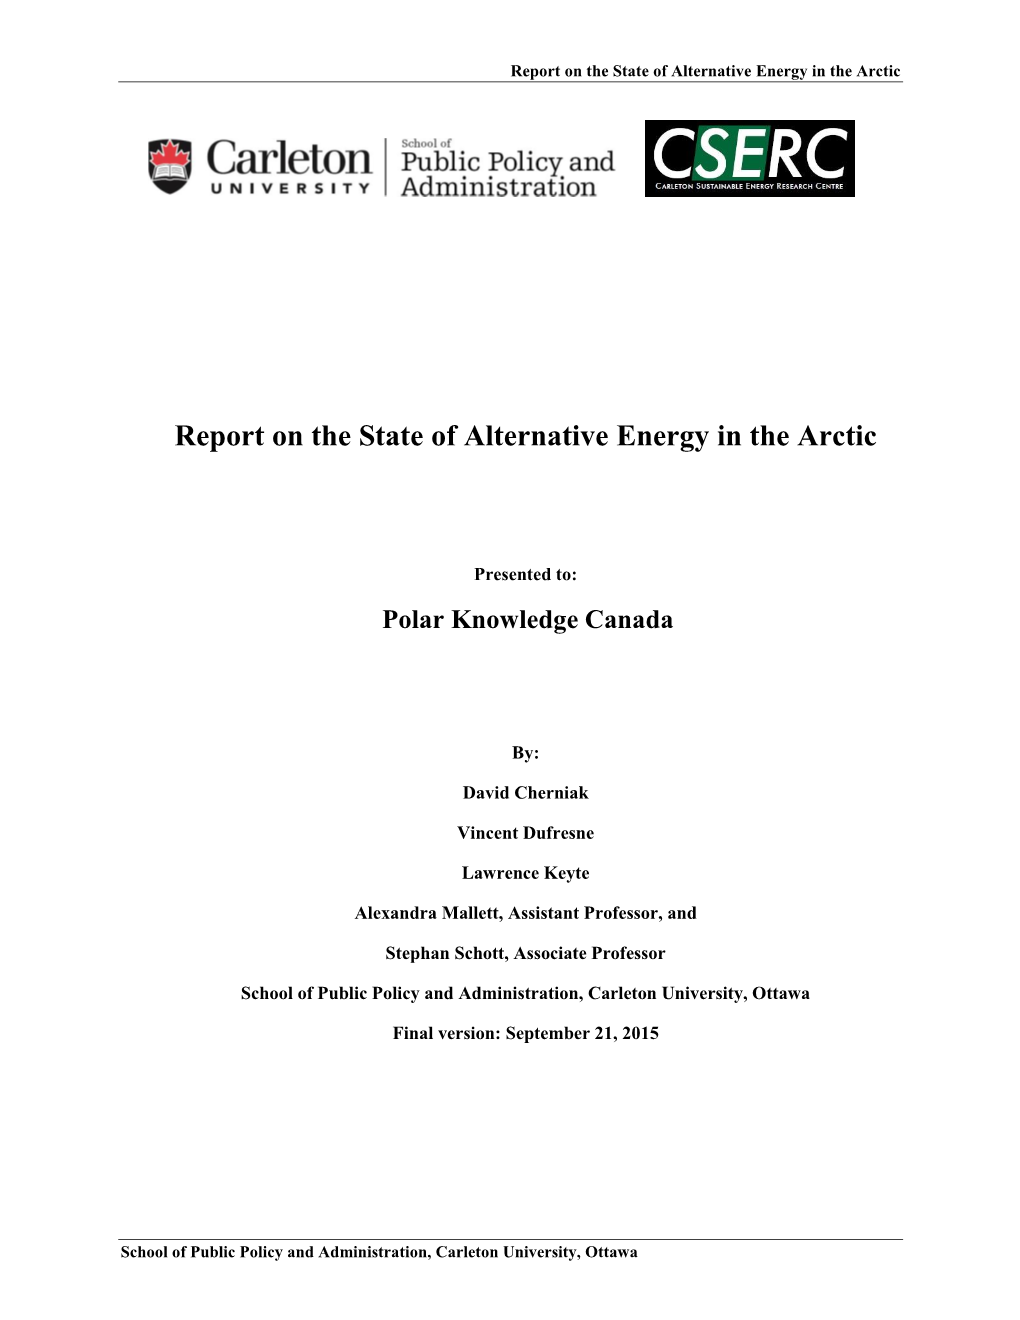 State of Domestic Energy Provision in the Arctic.Docx